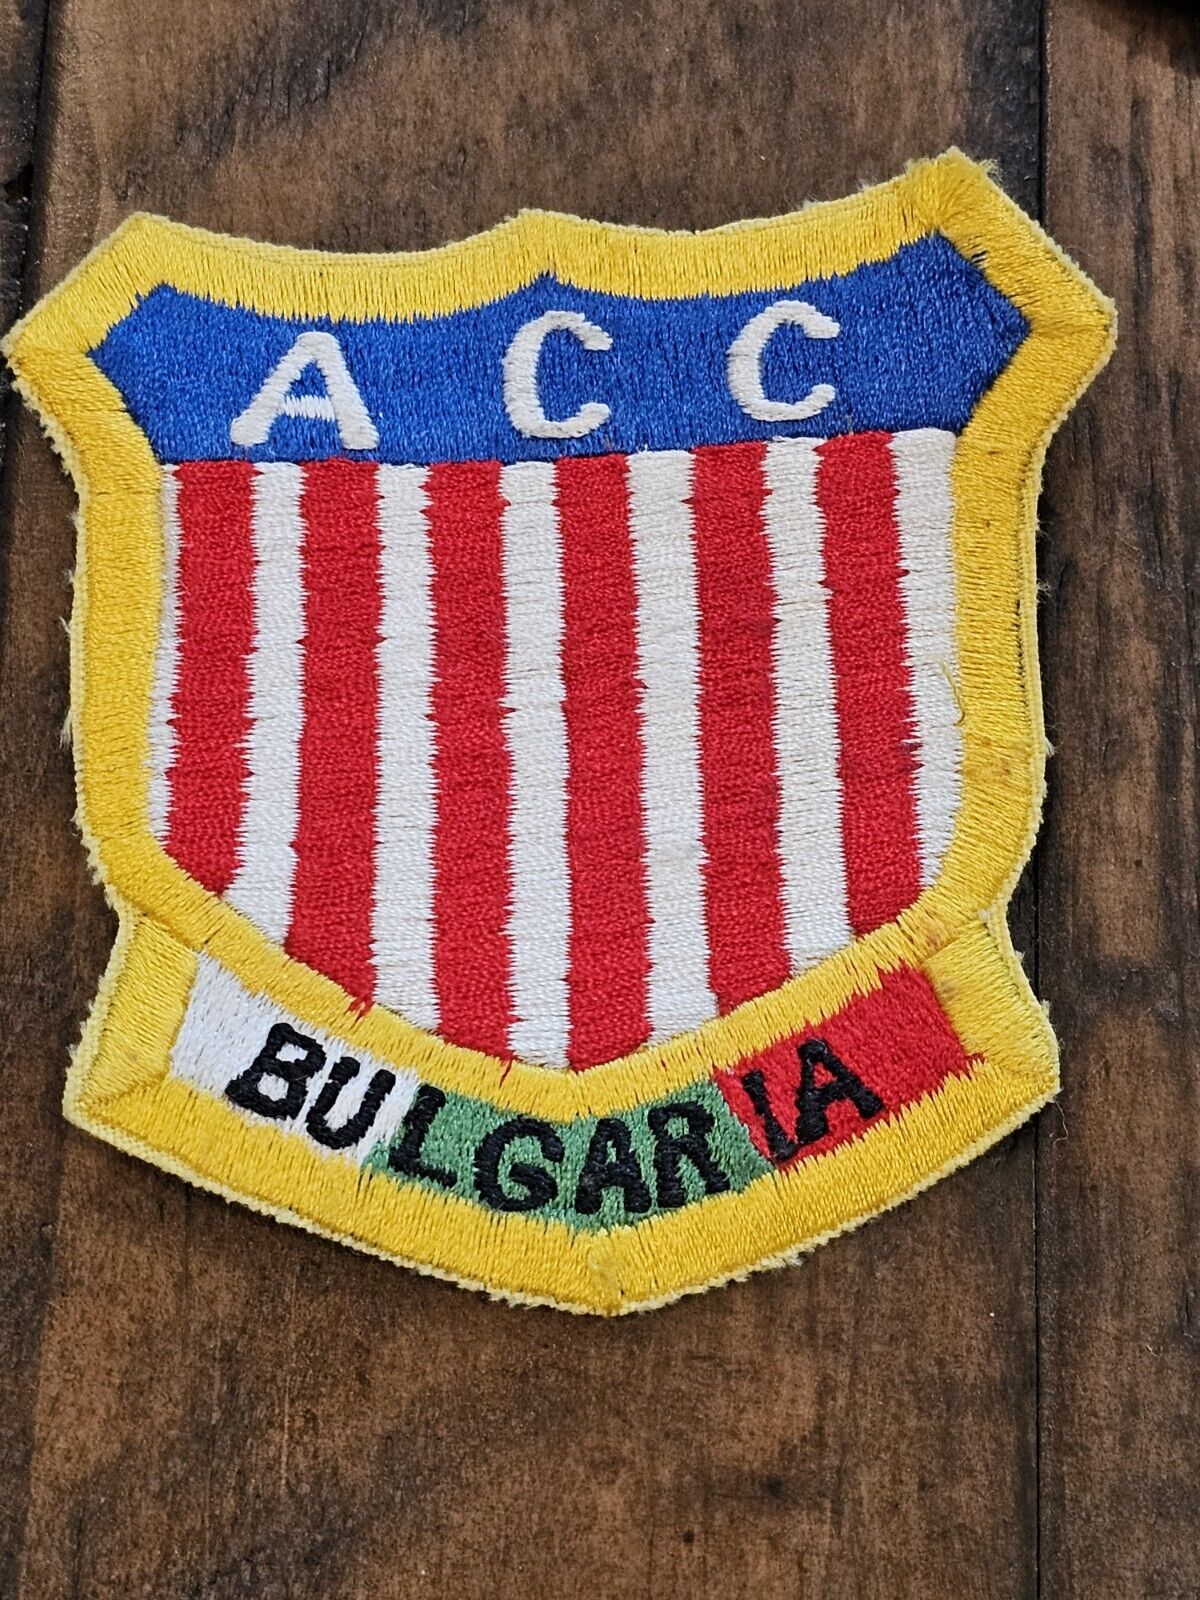 WWII US Army ACC Austria Occupation Bulgaria Theater Made Patch L@@K